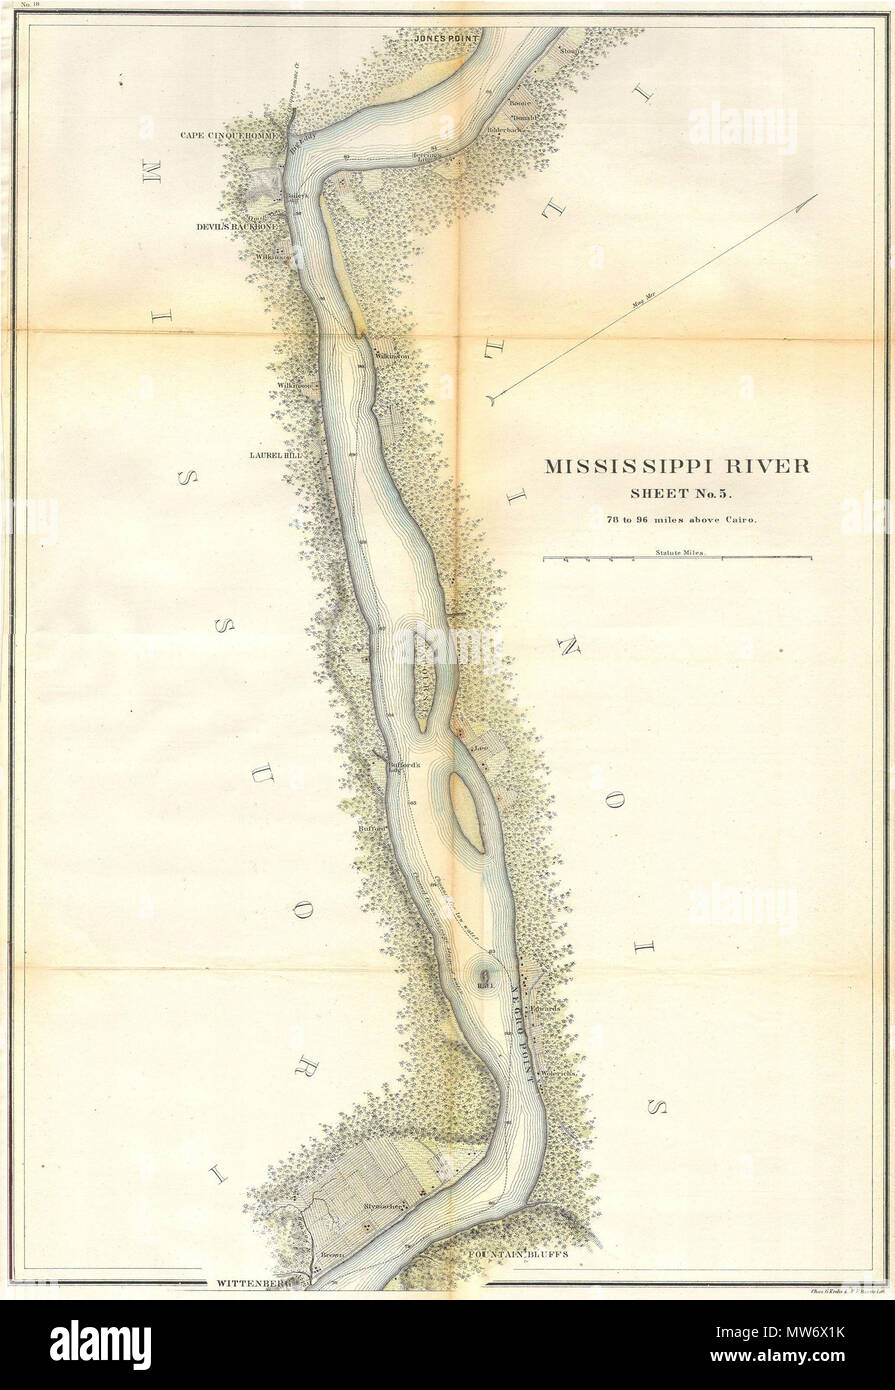 . Mississippi River 78 to 98 miles above Cairo, Illinois.  English: This is a beautiful hand colored 1865 United States Costal Survey chart or map of a part of the Mississippi River between Illinois and Missouri, roughly between 78 and 96 miles above Cairo, Illinois. Sheet five of a six sheet set depicting the Mississippi River from Cairo Illinois to St. Mary’s Missouri. The bends in the river are named, as are the many river islands shown. Notes towns, wood lots, landings and farms, many of which are shown with family names. Produced under the supervision of A. D. Bache in 1865. Professionall Stock Photo